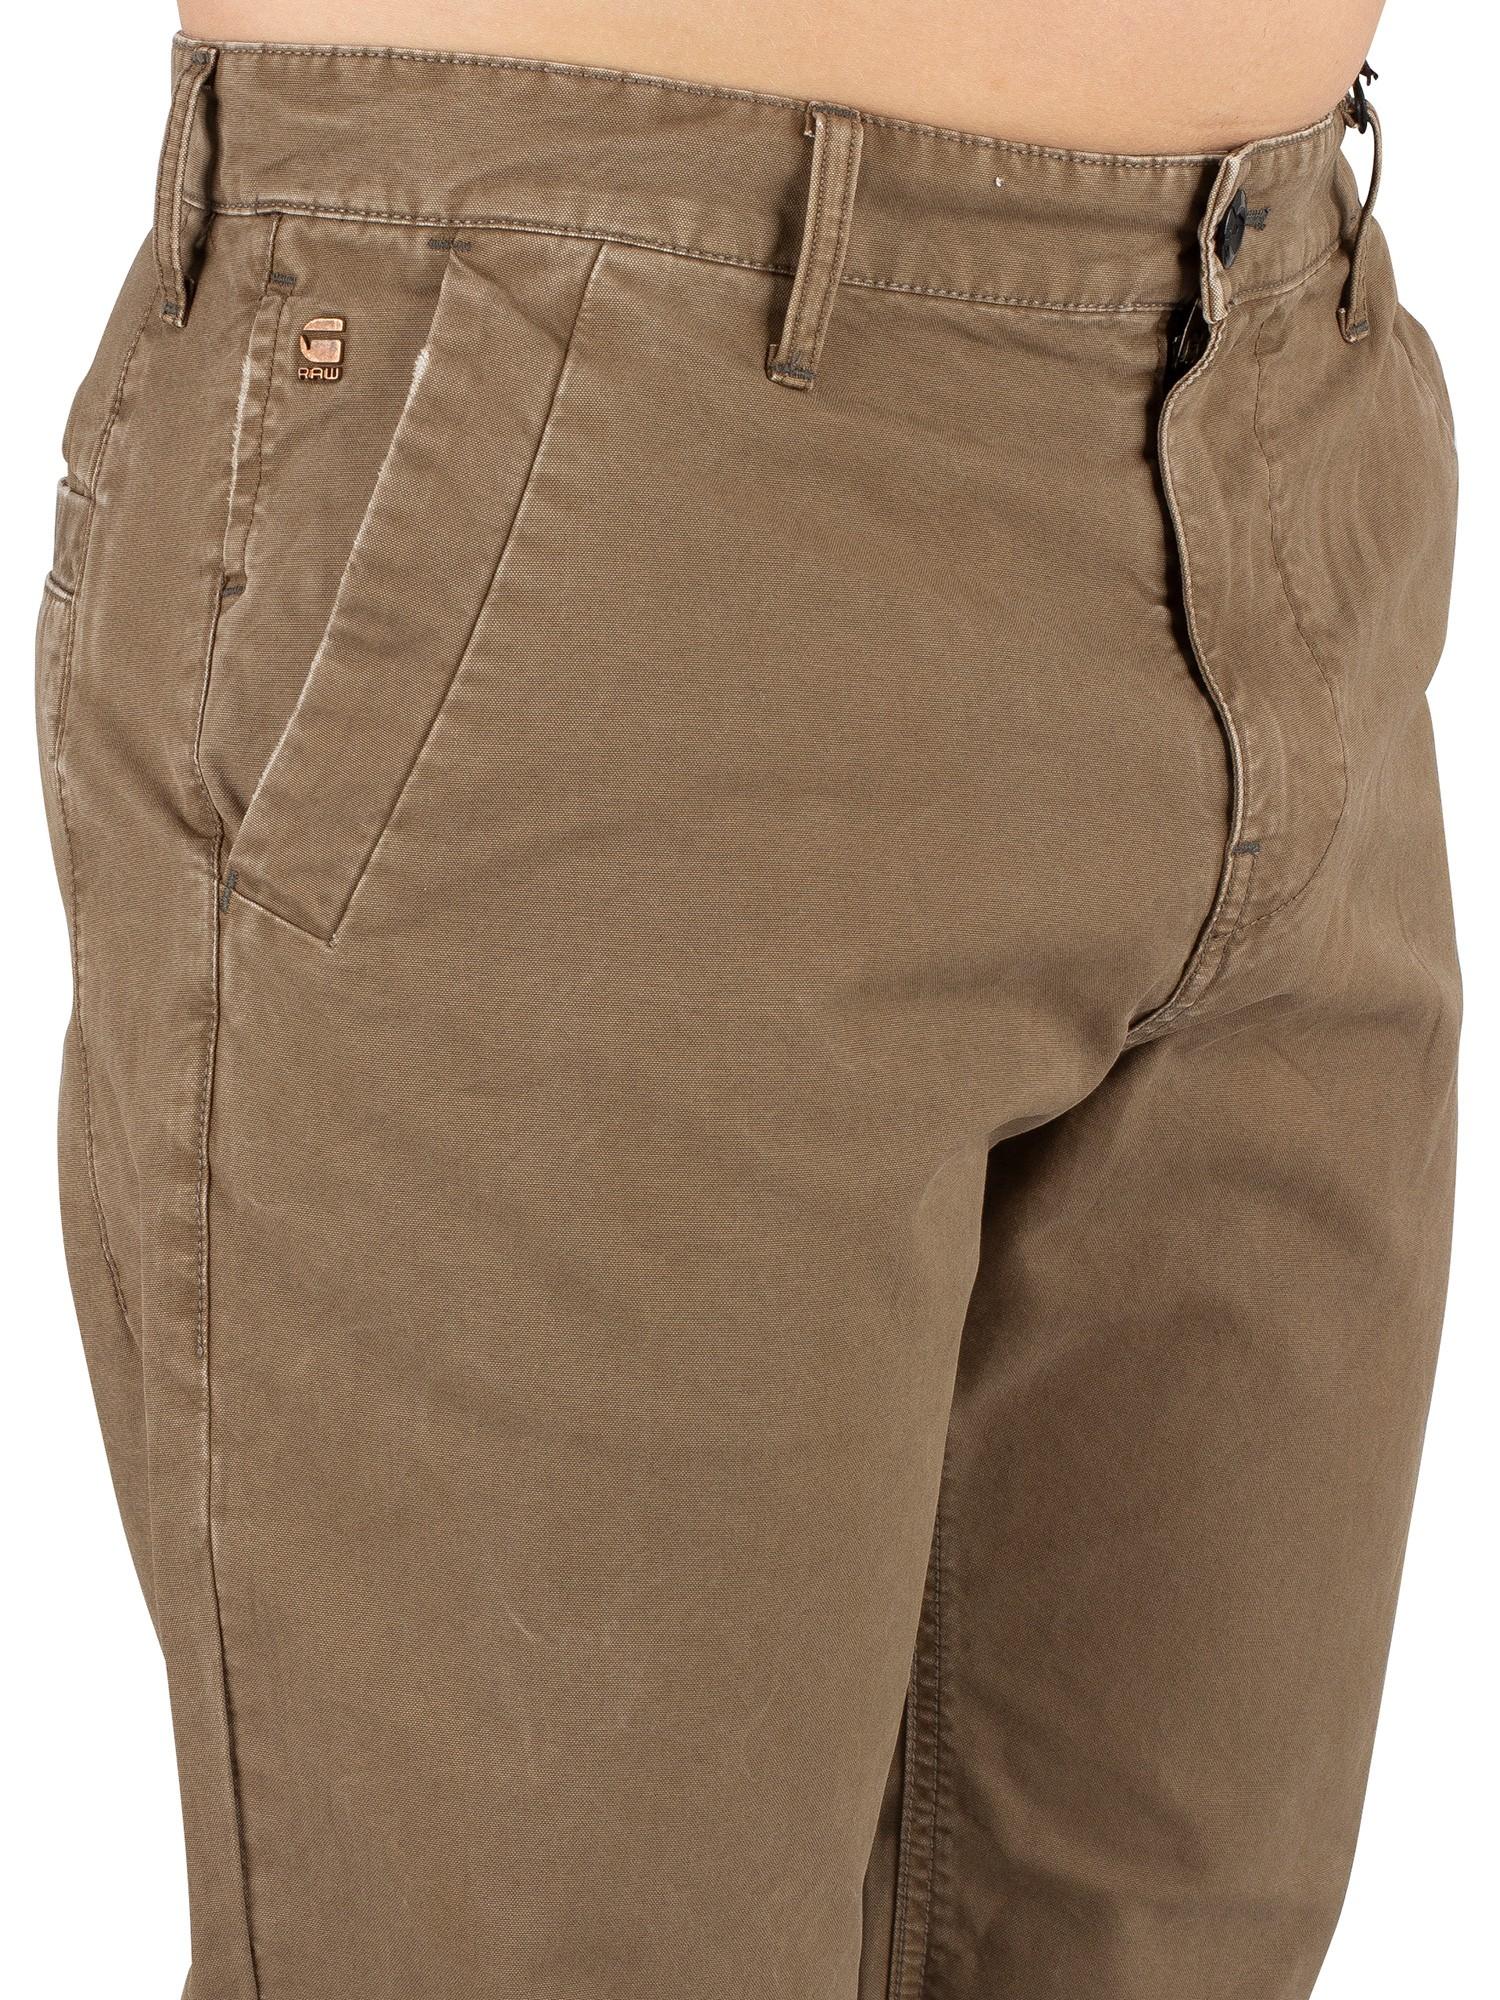 G Star Bronson Straight Tapered Chino, Buy Now, Top Sellers, 58% OFF,  www.chocomuseo.com